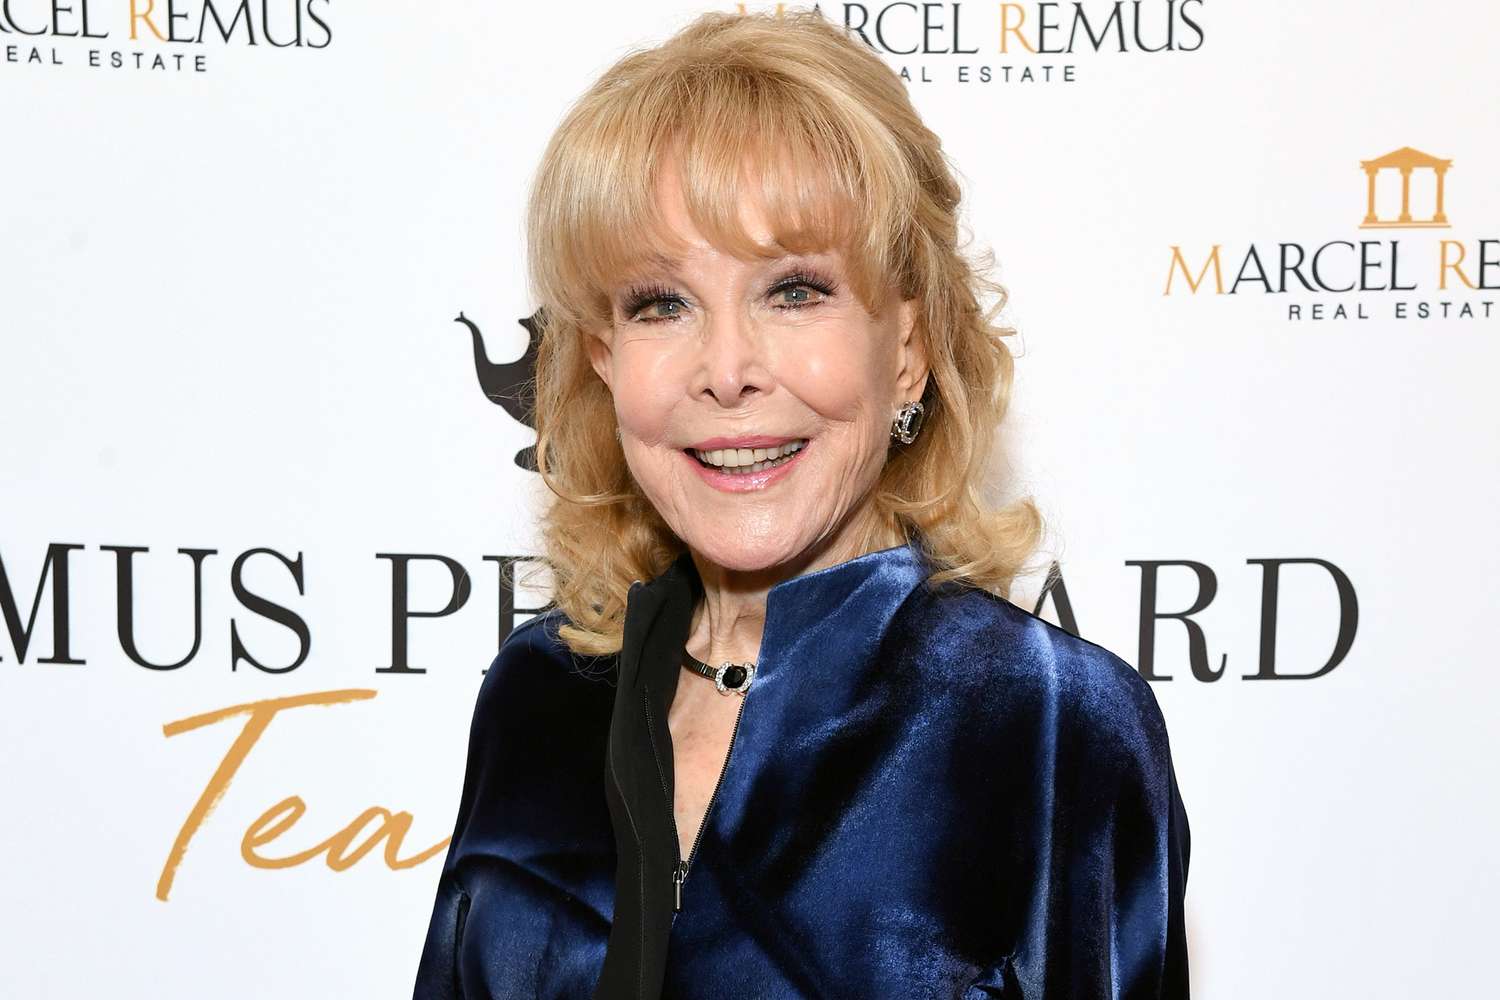 charity diaz recommends barbara eden in playboy pic